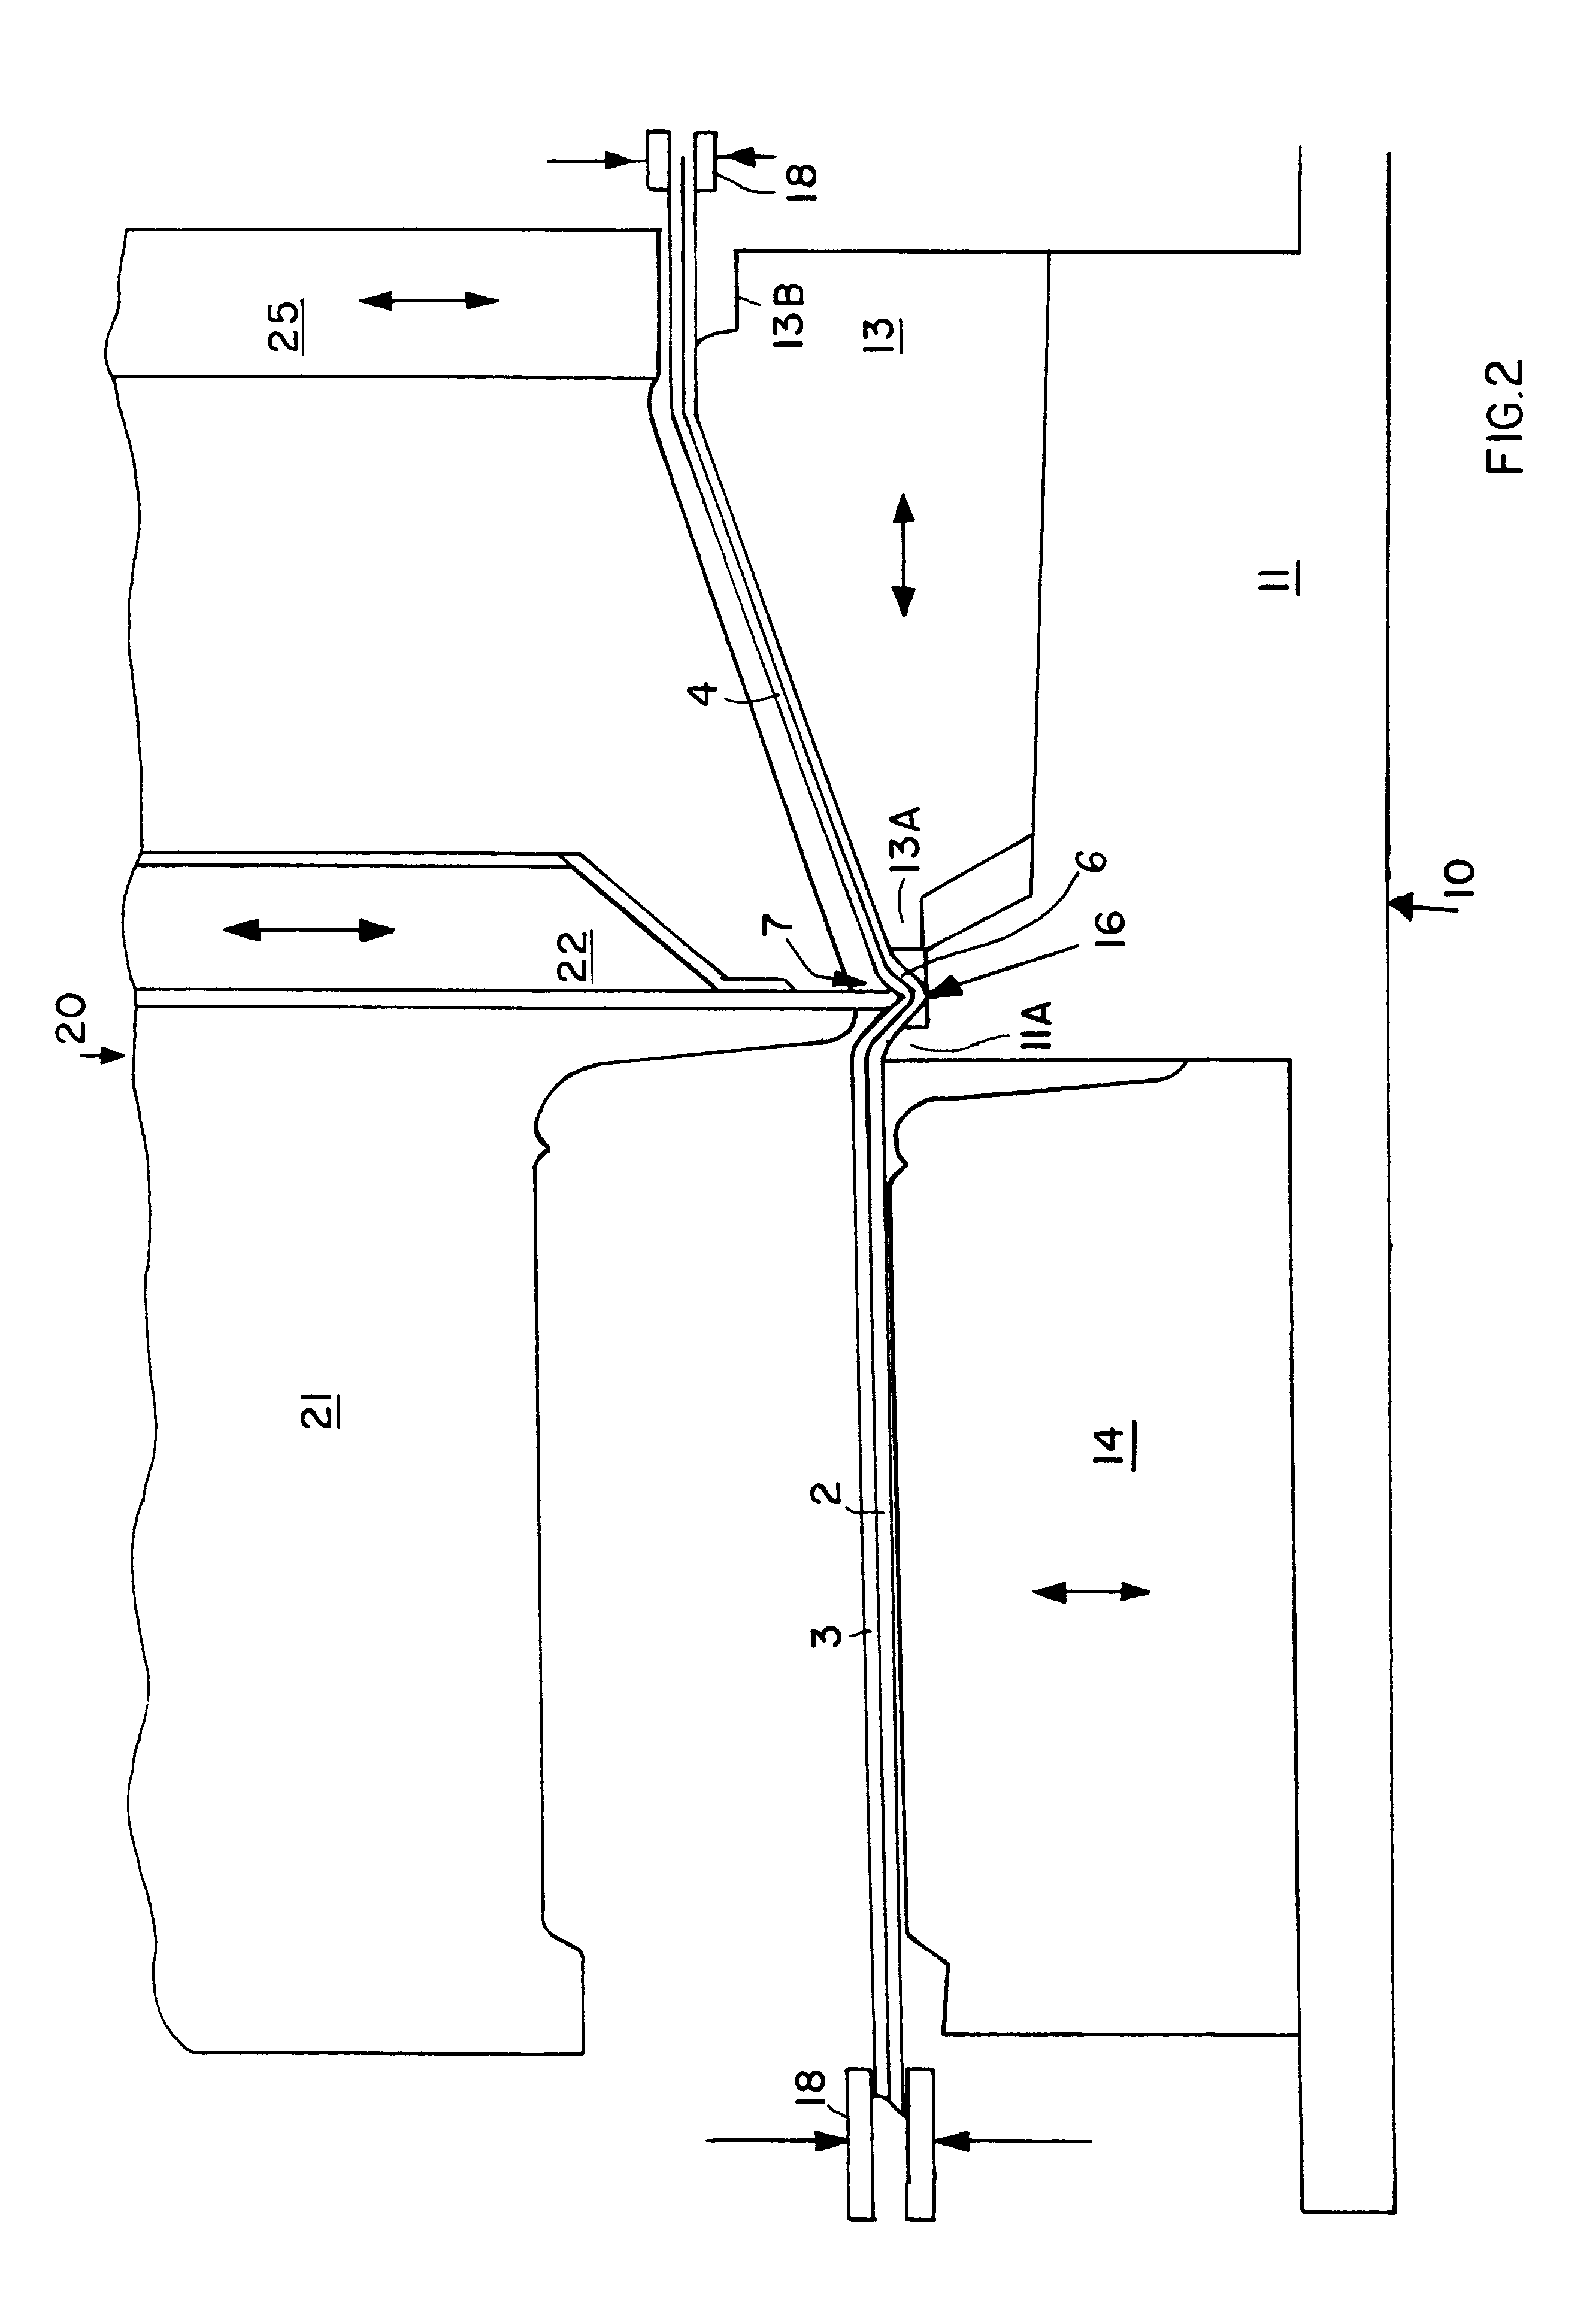 Vehicle trim component having two-part cover material, and method and apparatus for producing the same